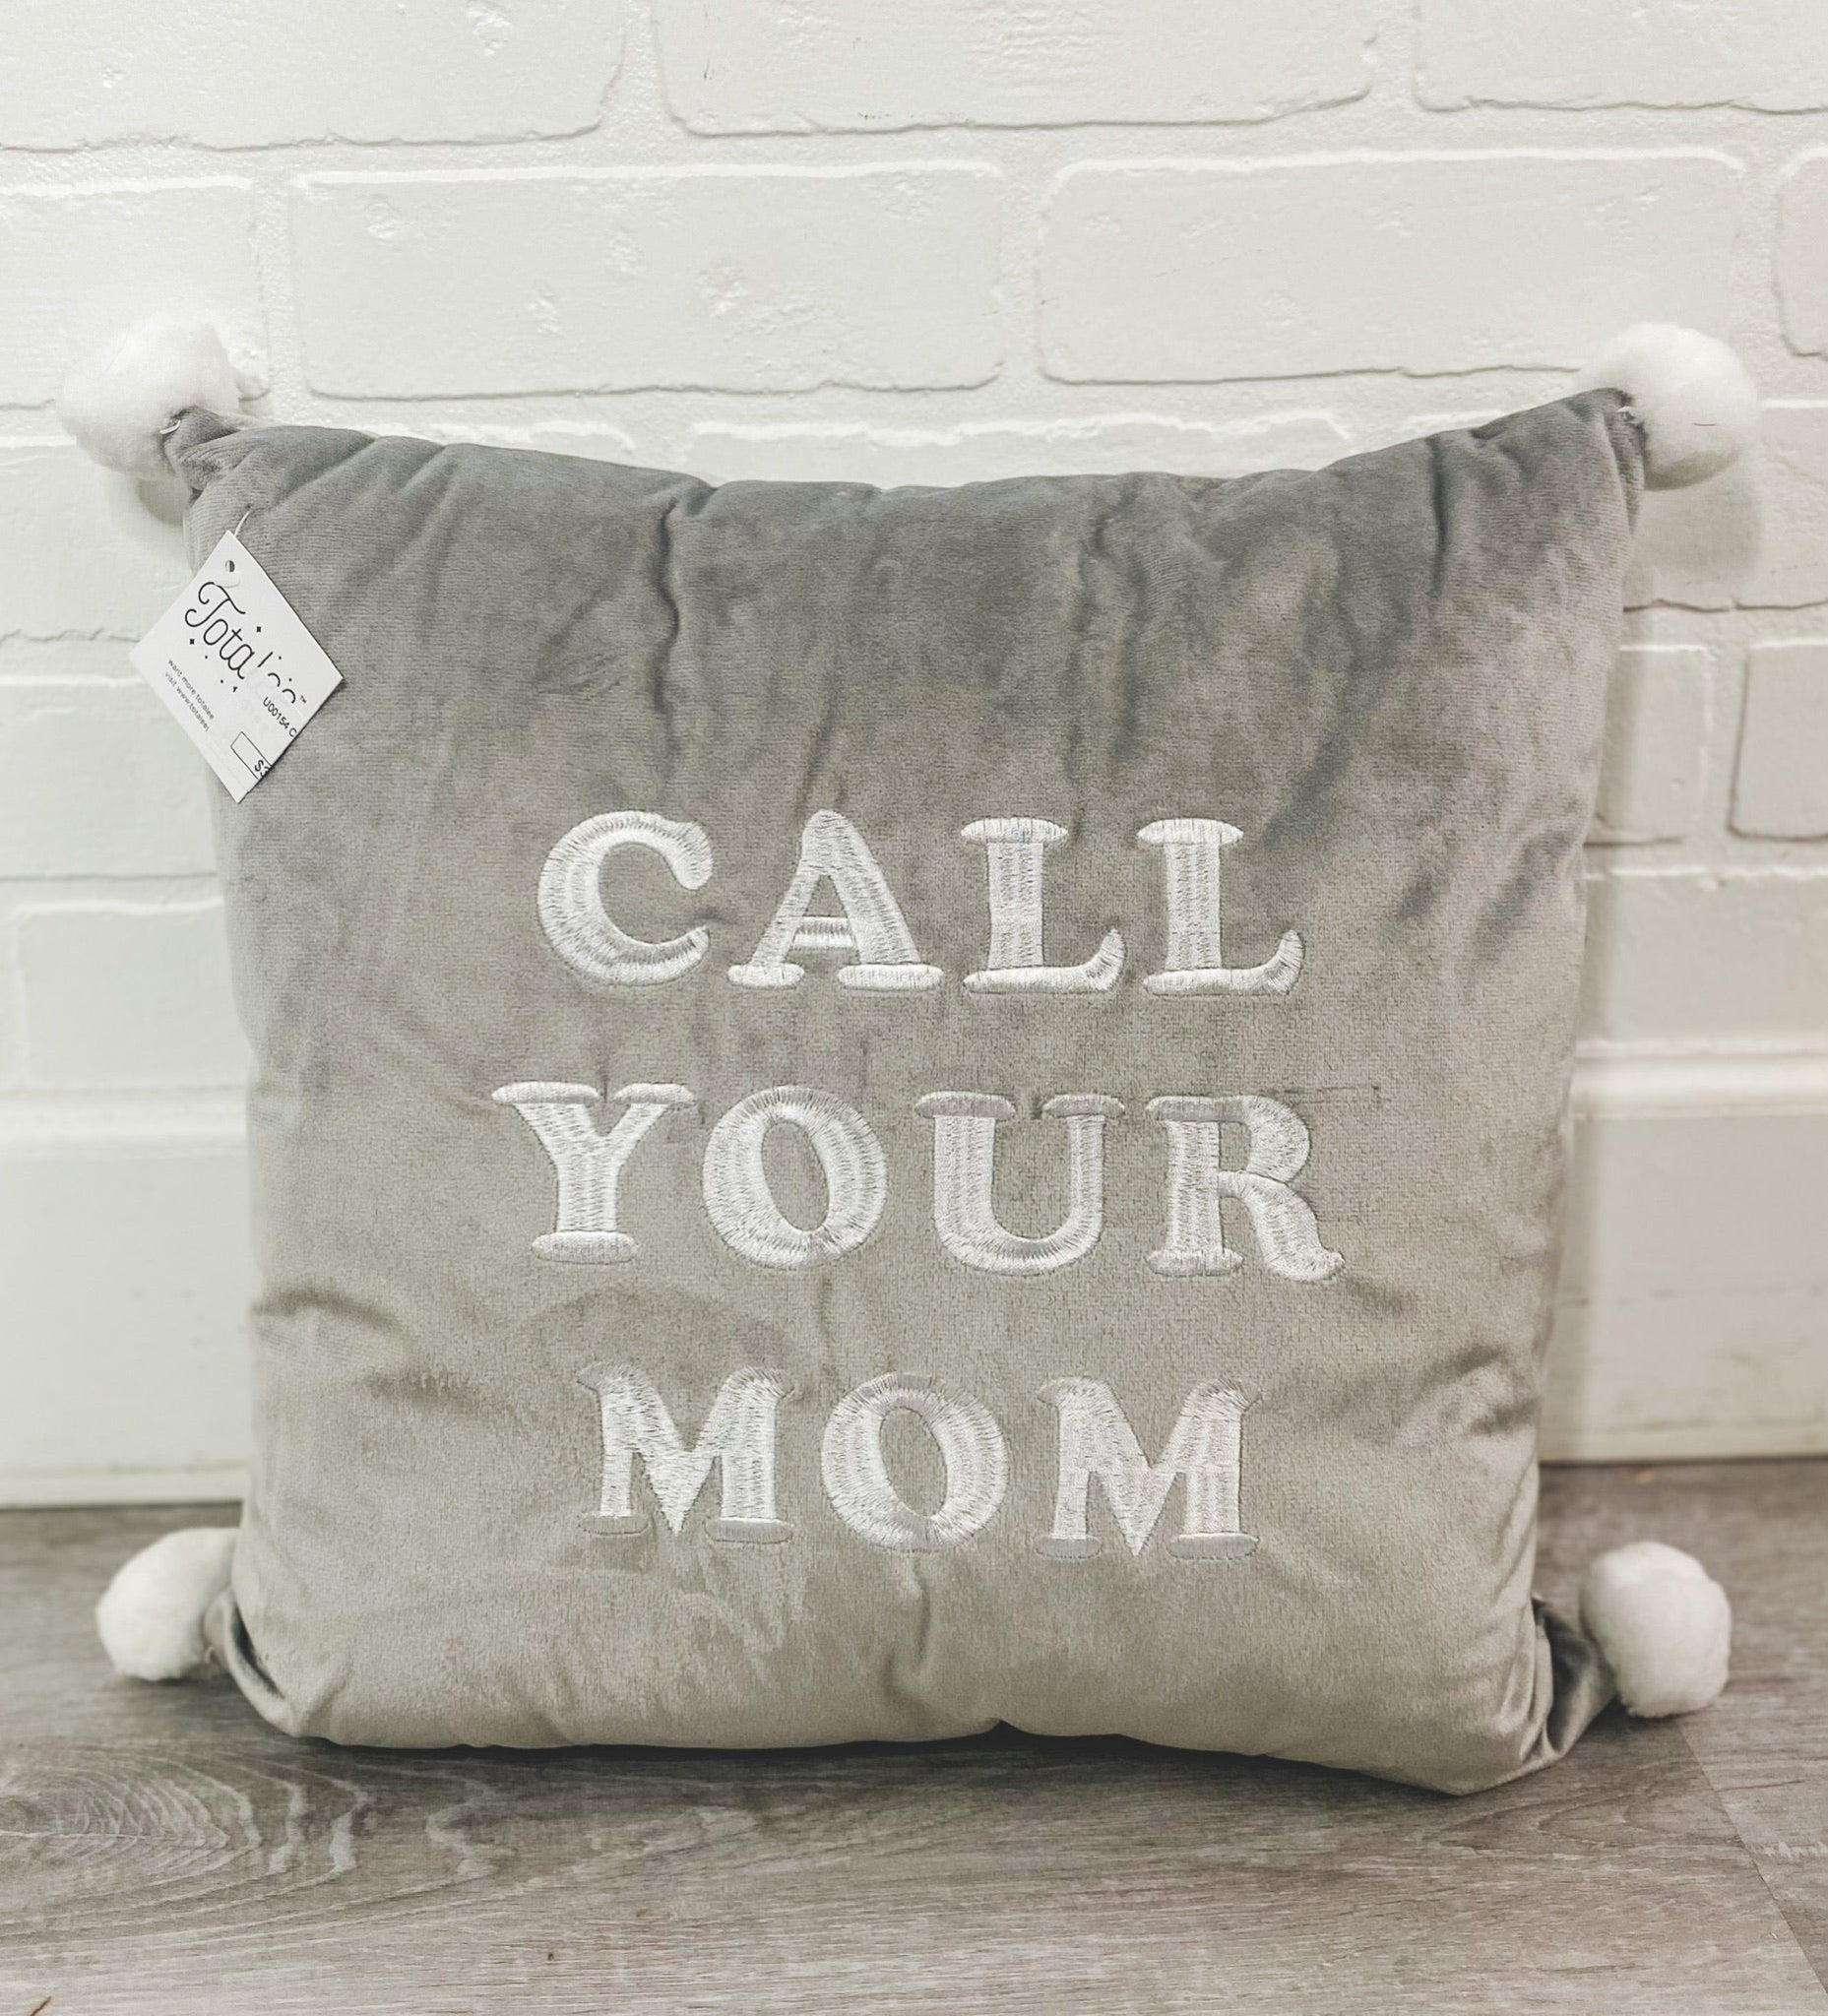 Call your mom square pillow - Trendy Gifts at Lush Fashion Lounge Boutique in Oklahoma City